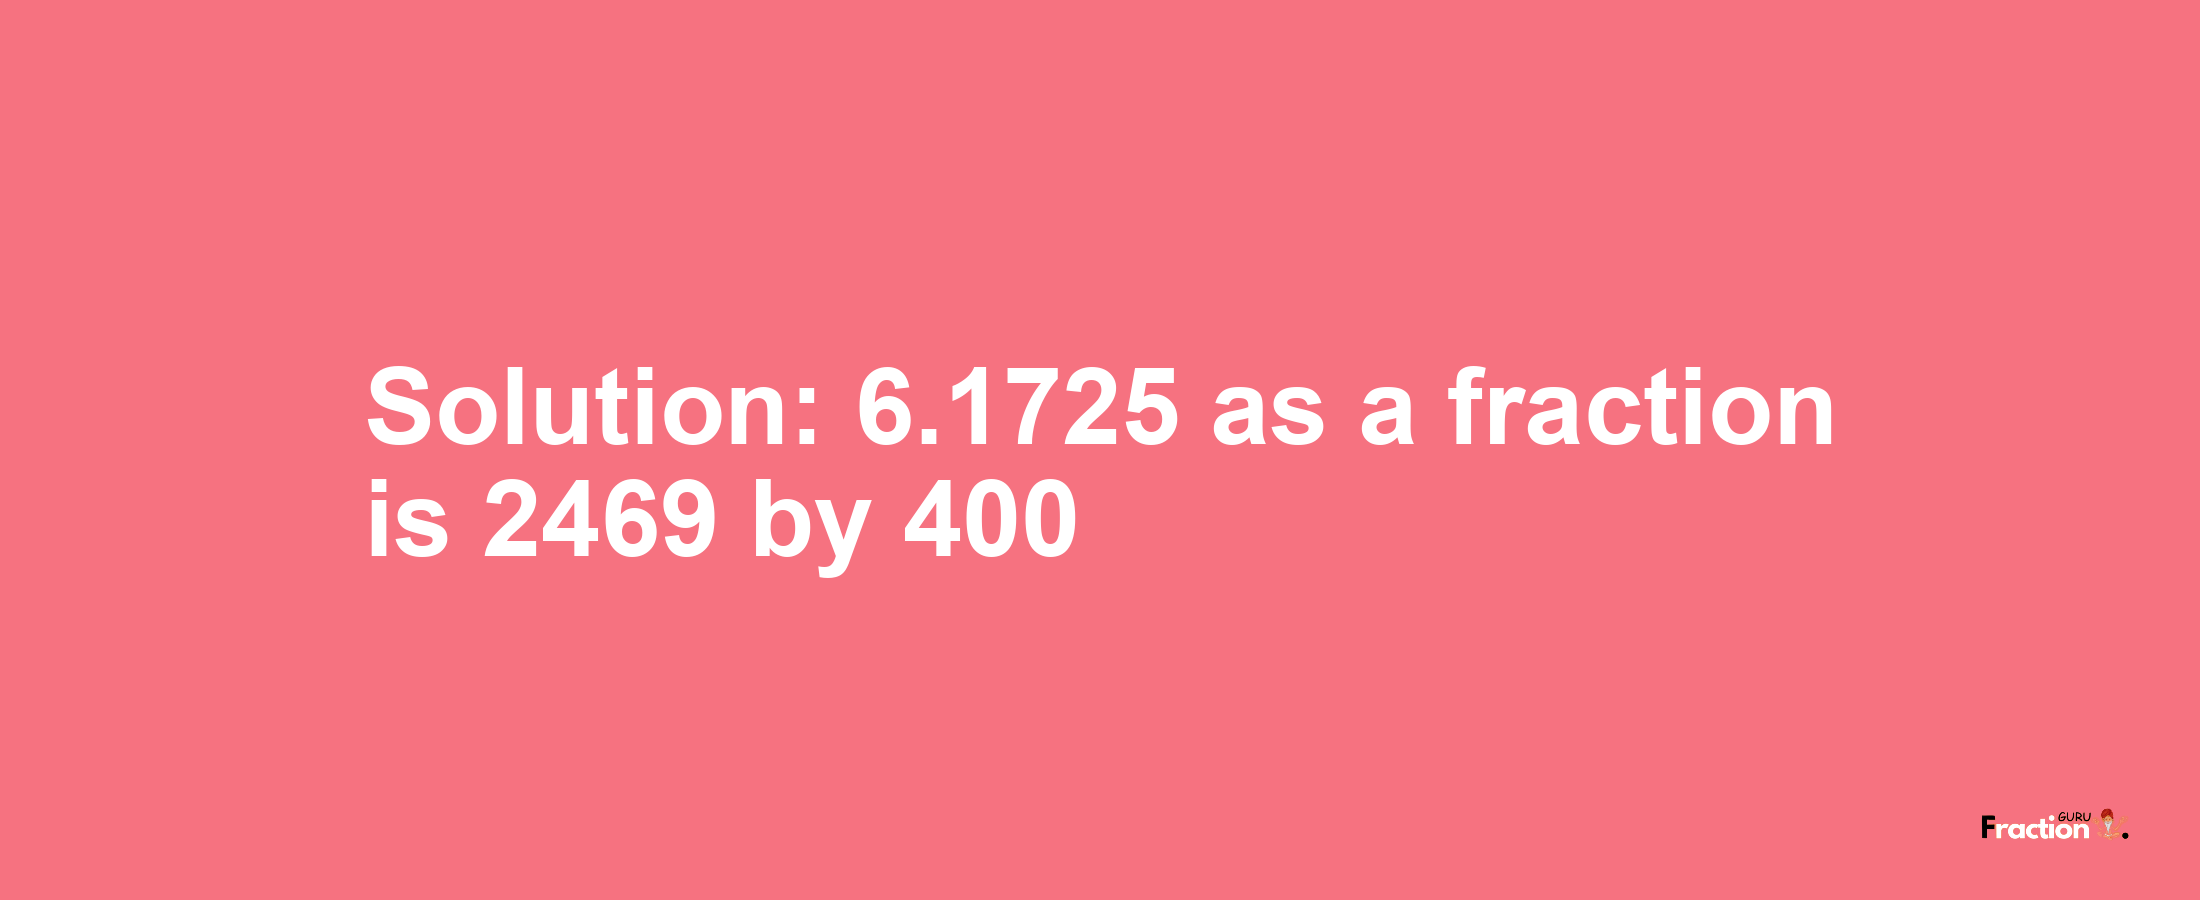 Solution:6.1725 as a fraction is 2469/400